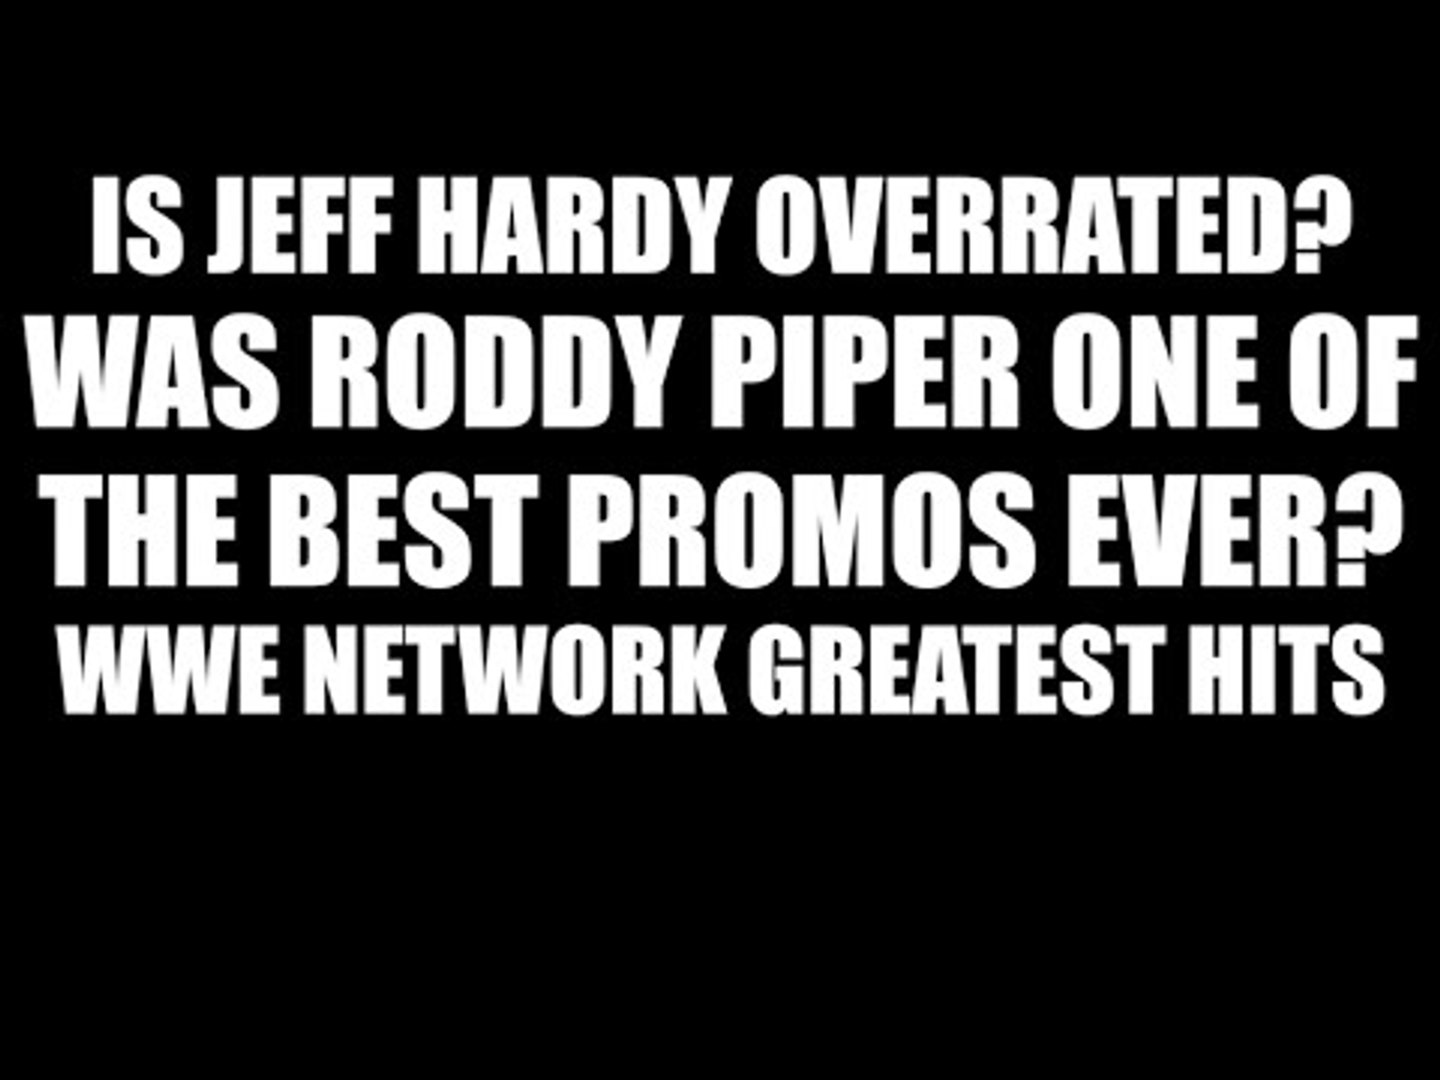 ⁣Is Jeff Hardy Overrated? Was Rowdy Roddy Piper one of the Best Promos Ever?